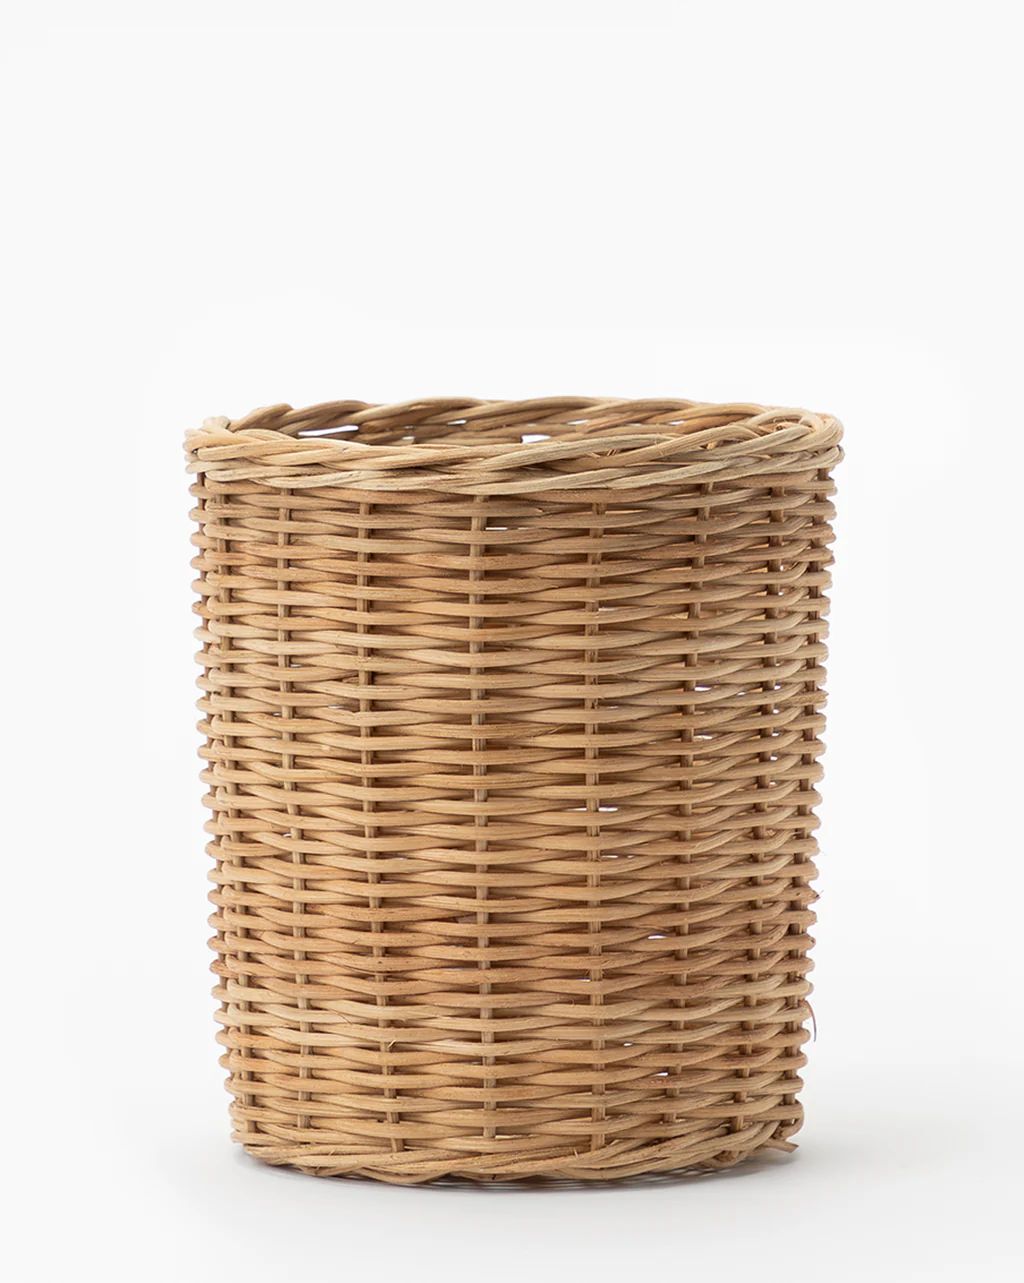 Hand-Woven Wicker Vase | McGee & Co.